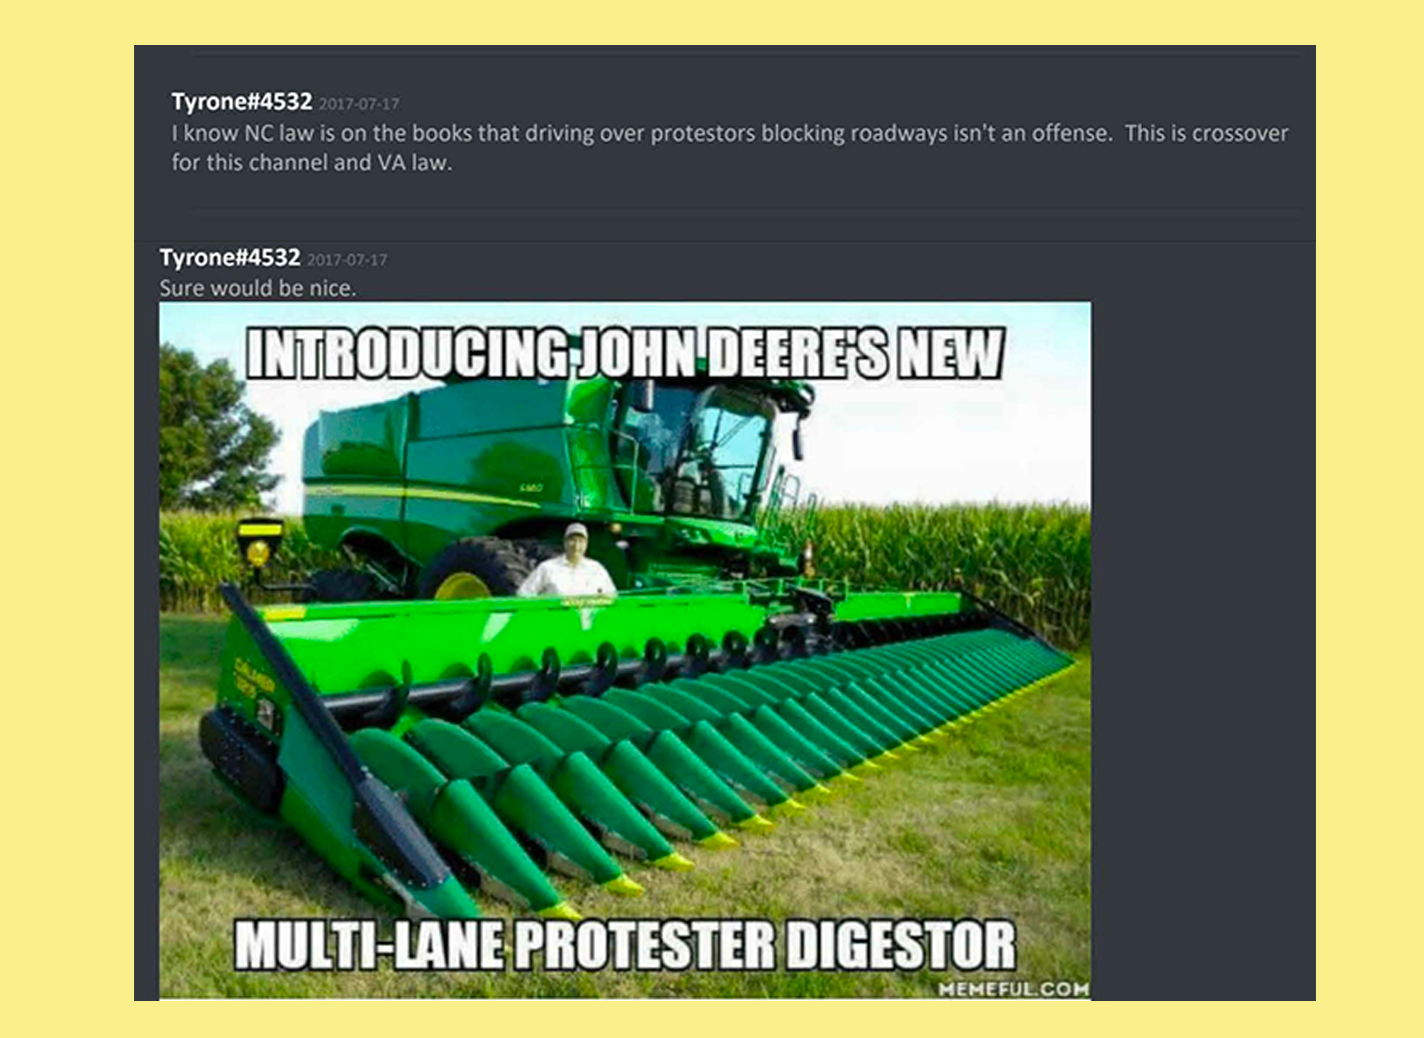 Discord user Tyrone: I know NC law is on the books that driving over protesters blocking roadways isn't an offense. This is crossover for this channel an VA law. Discord user Tryone: [meme of a tractor with caption multi-lane protester digestor]